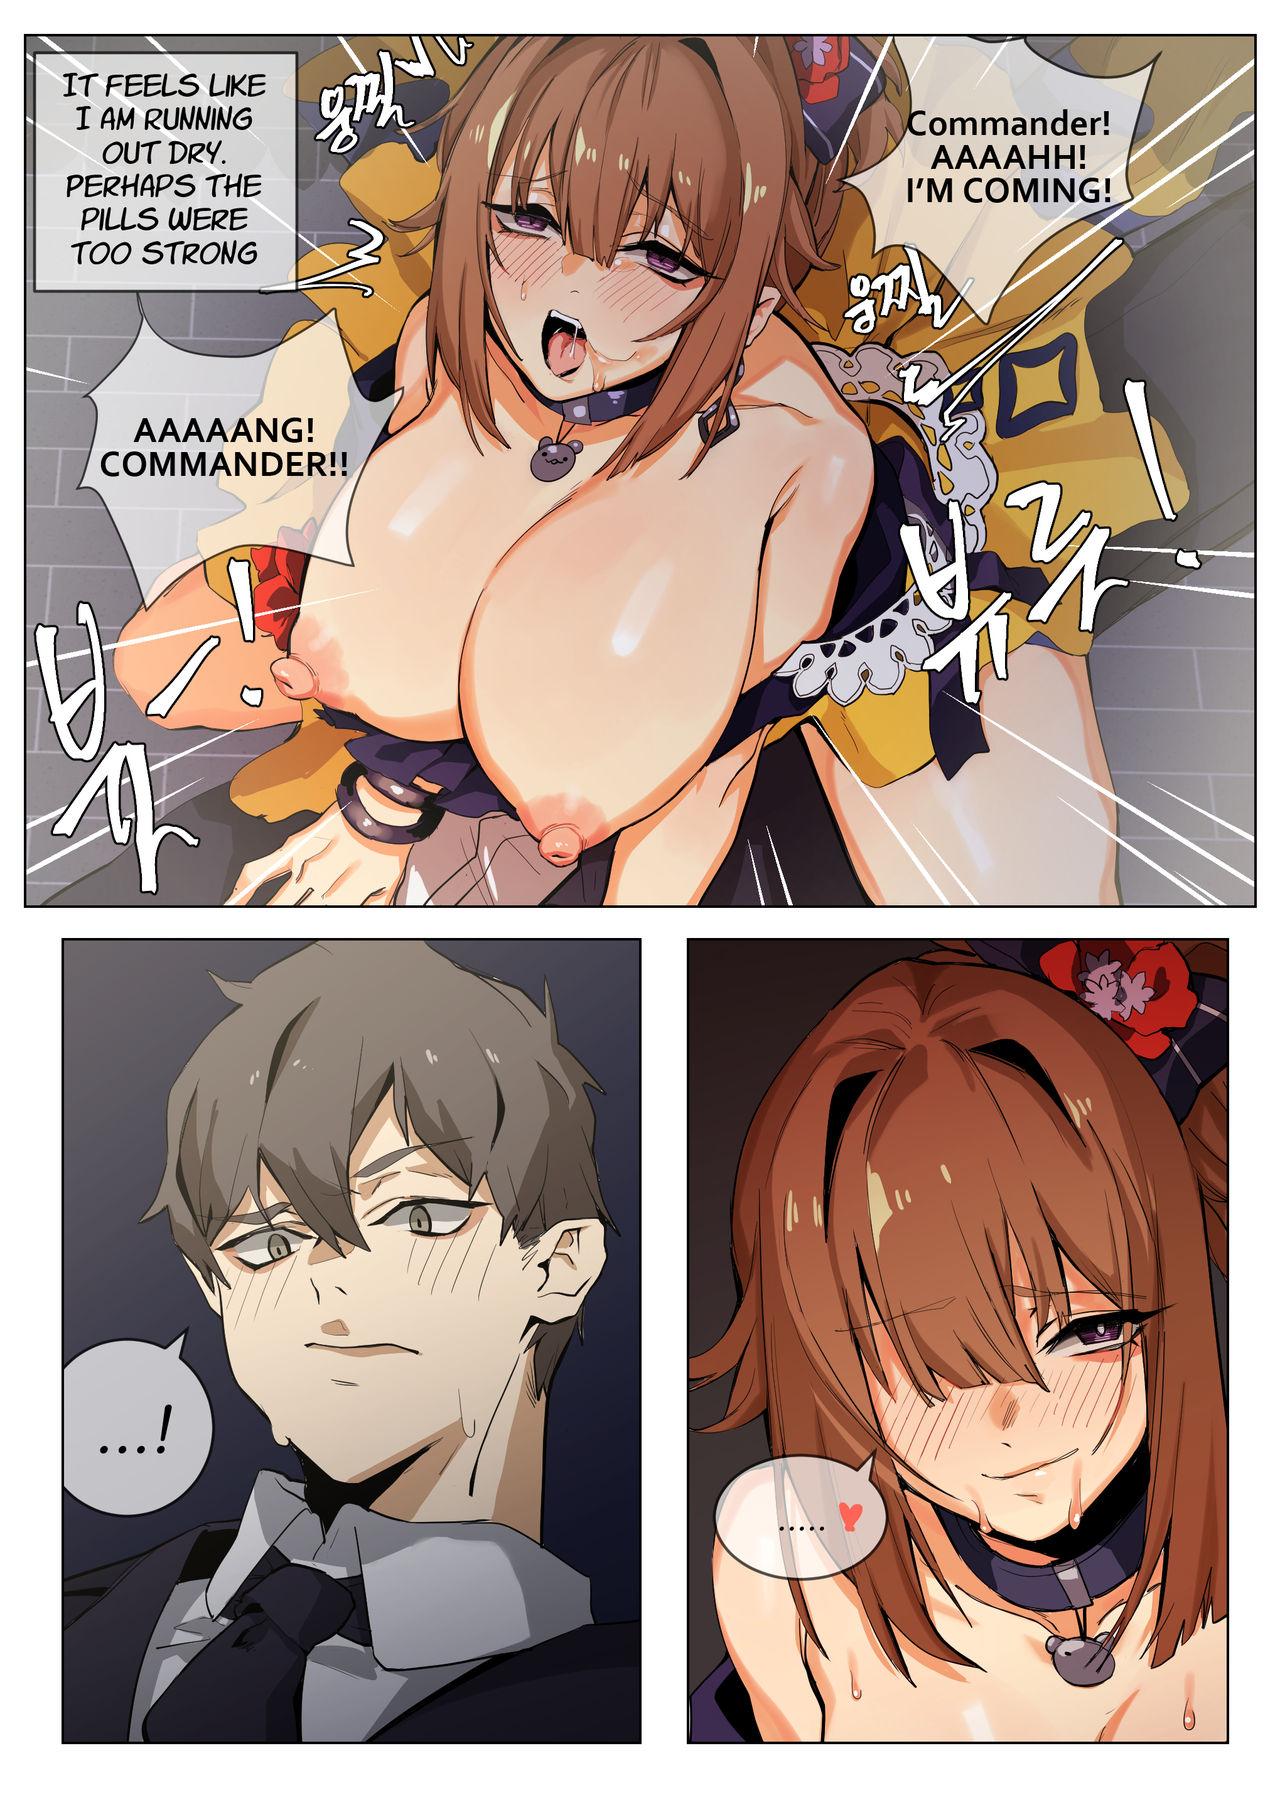 Doctor Grizzly - Girls frontline Handsome - Page 28